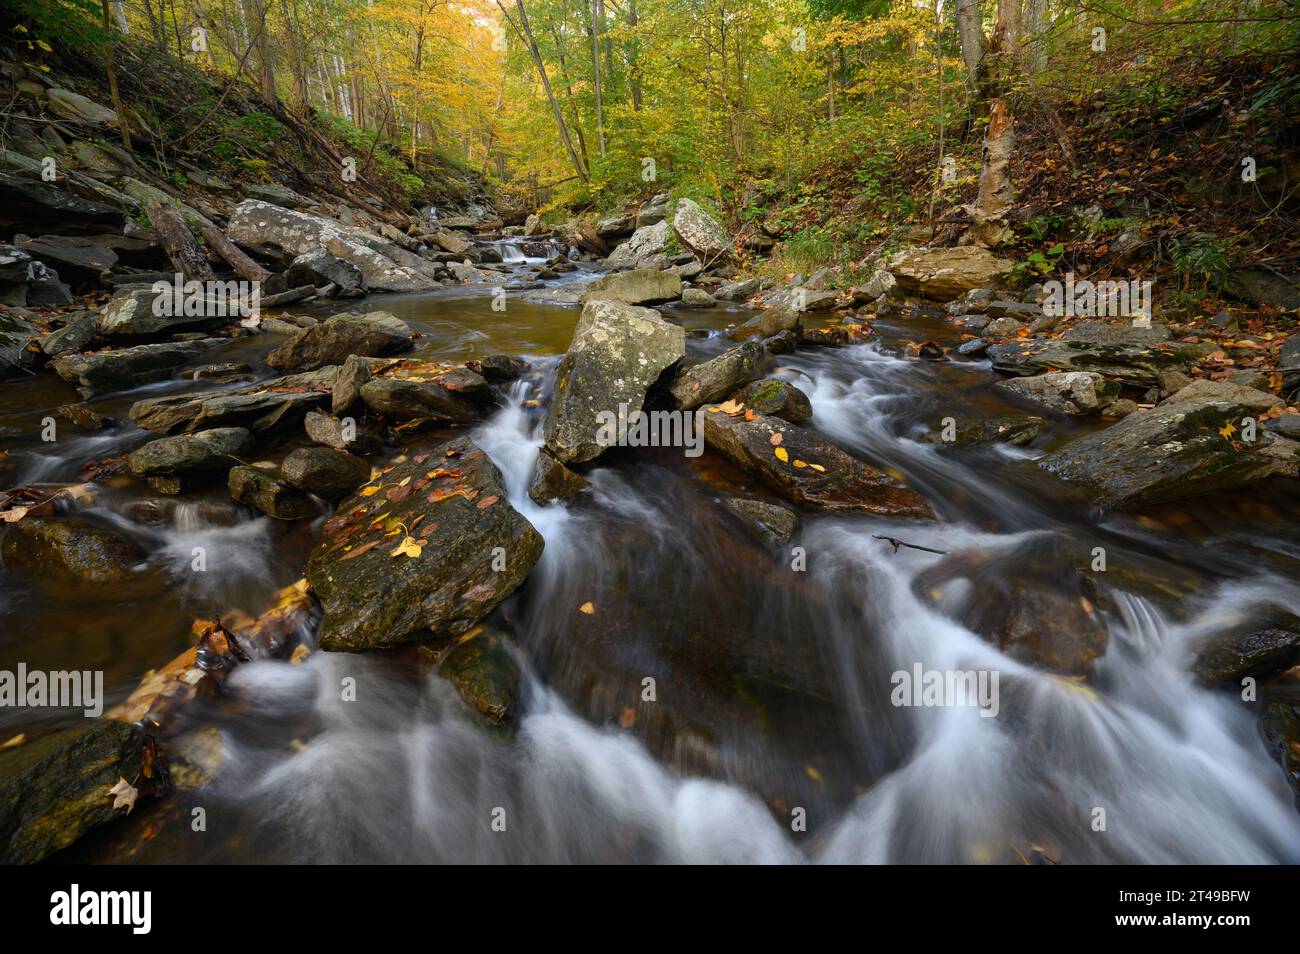 Big Hunting Creek in the Catoctin Mountains surrounded by the autumn colours of the trees in fall. Stock Photo